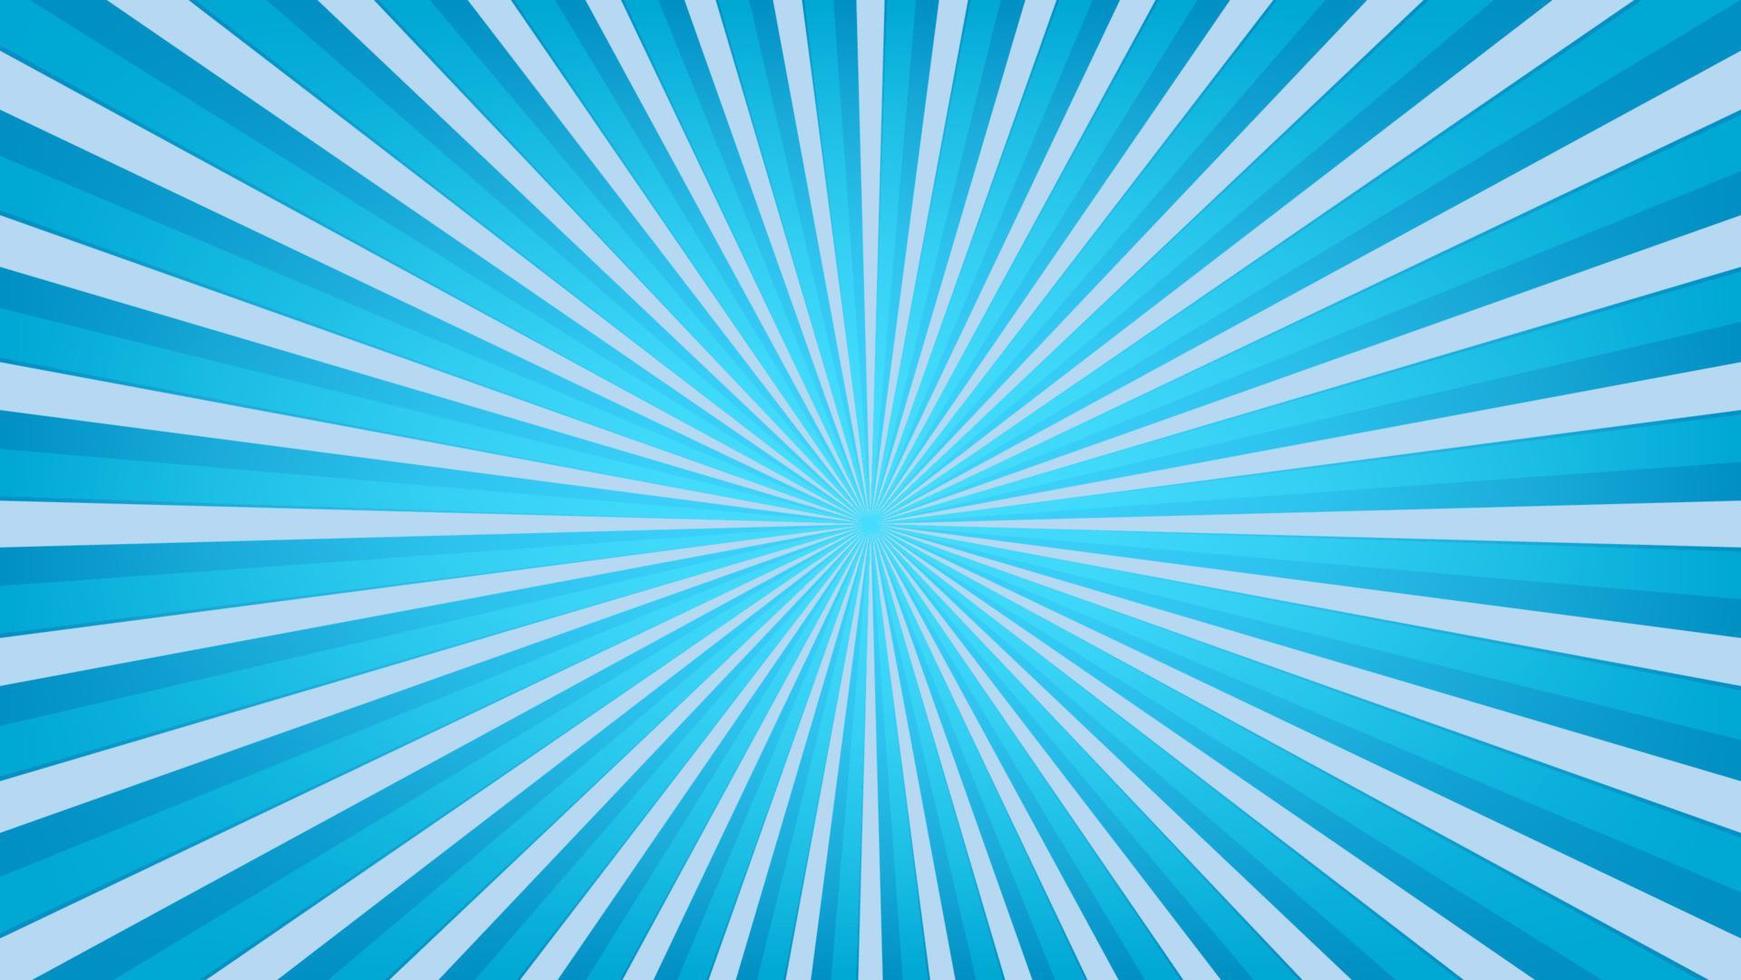 abstract blue sunburst pattern background for modern graphic design element. shining ray cartoon with colorful for website banner wallpaper and poster card decoration vector